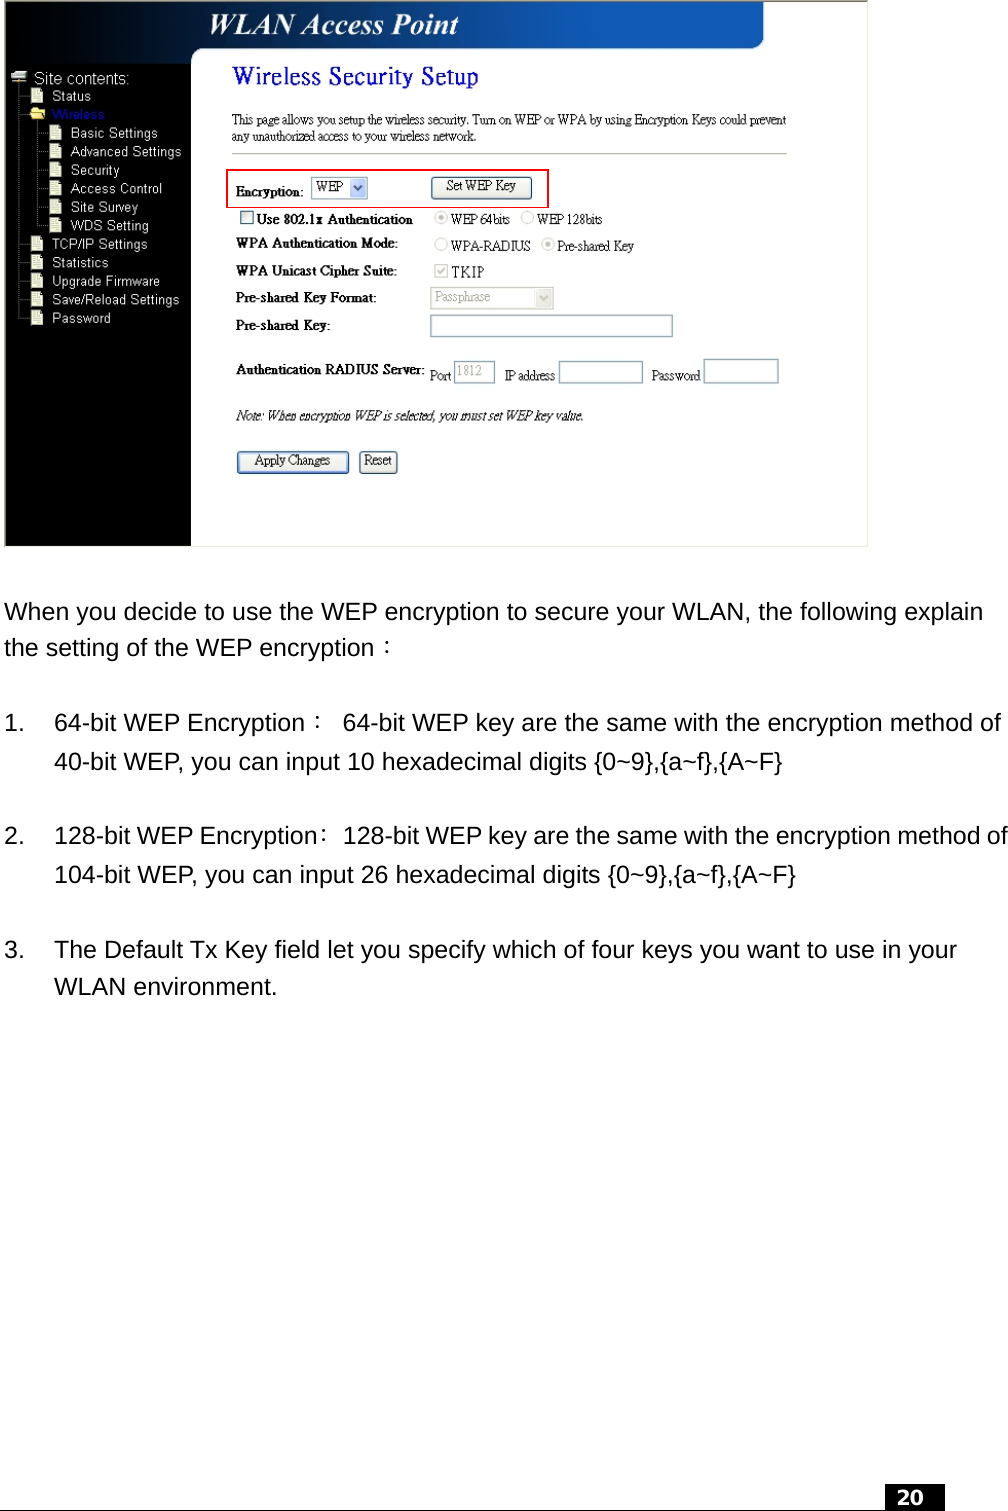   When you decide to use the WEP encryption to secure your WLAN, the following explain the setting of the WEP encryption：  1.  64-bit WEP Encryption：  64-bit WEP key are the same with the encryption method of 40-bit WEP, you can input 10 hexadecimal digits {0~9},{a~f},{A~F}  2.  128-bit WEP Encryption：  128-bit WEP key are the same with the encryption method of 104-bit WEP, you can input 26 hexadecimal digits {0~9},{a~f},{A~F}  3.  The Default Tx Key field let you specify which of four keys you want to use in your WLAN environment.    20  